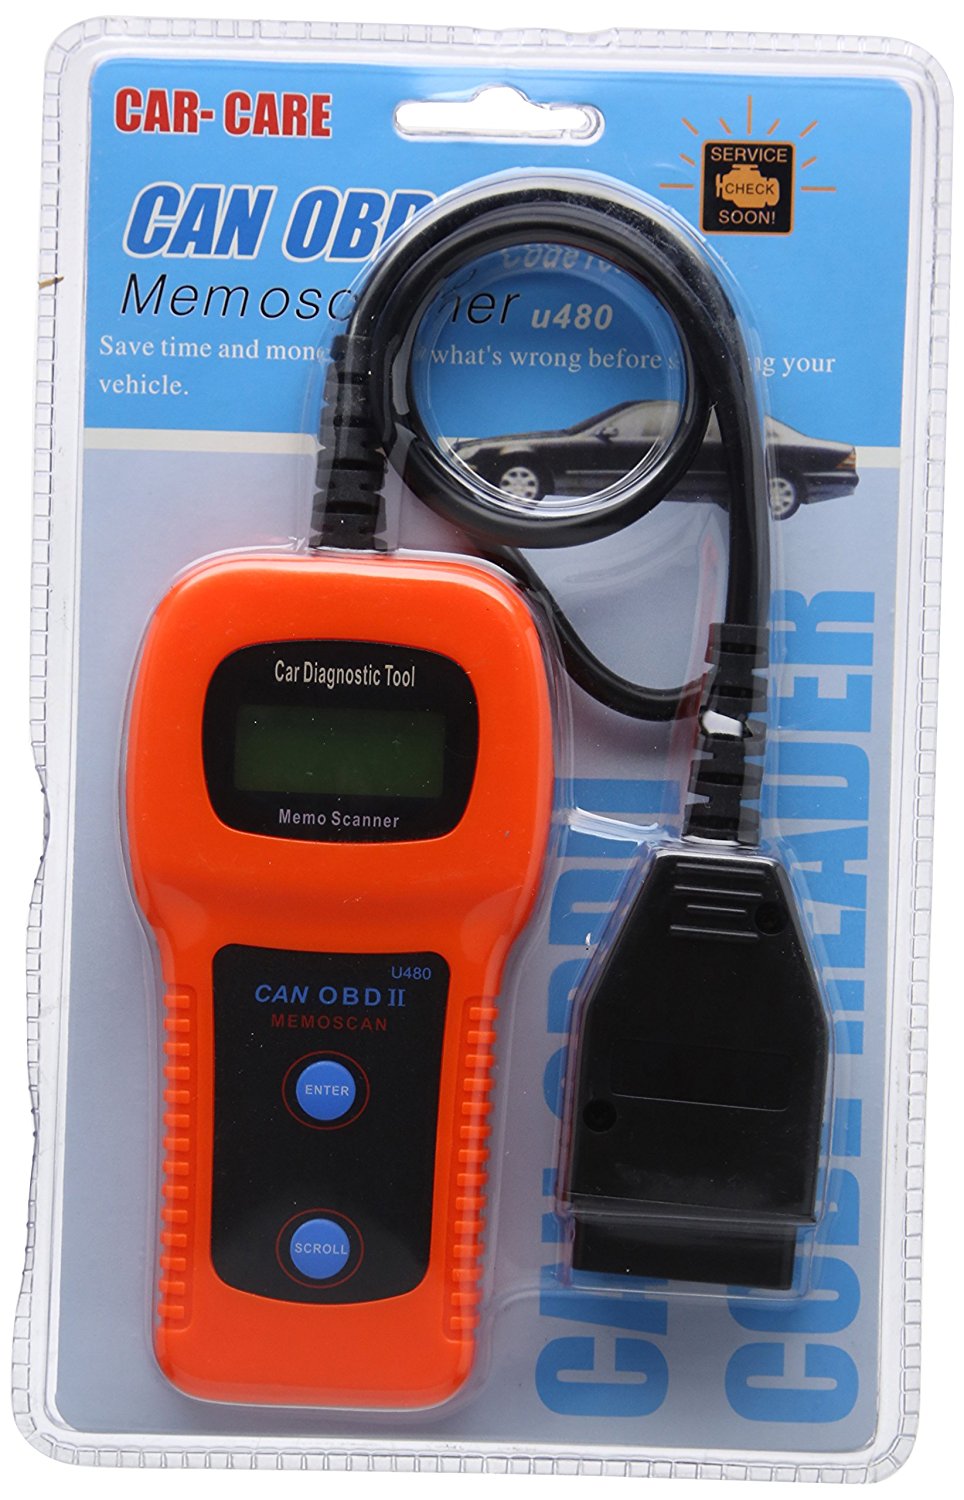 Best Car Diagnostic Tool U480 OBDII Check Engine Auto Scanner Trouble Code Reader